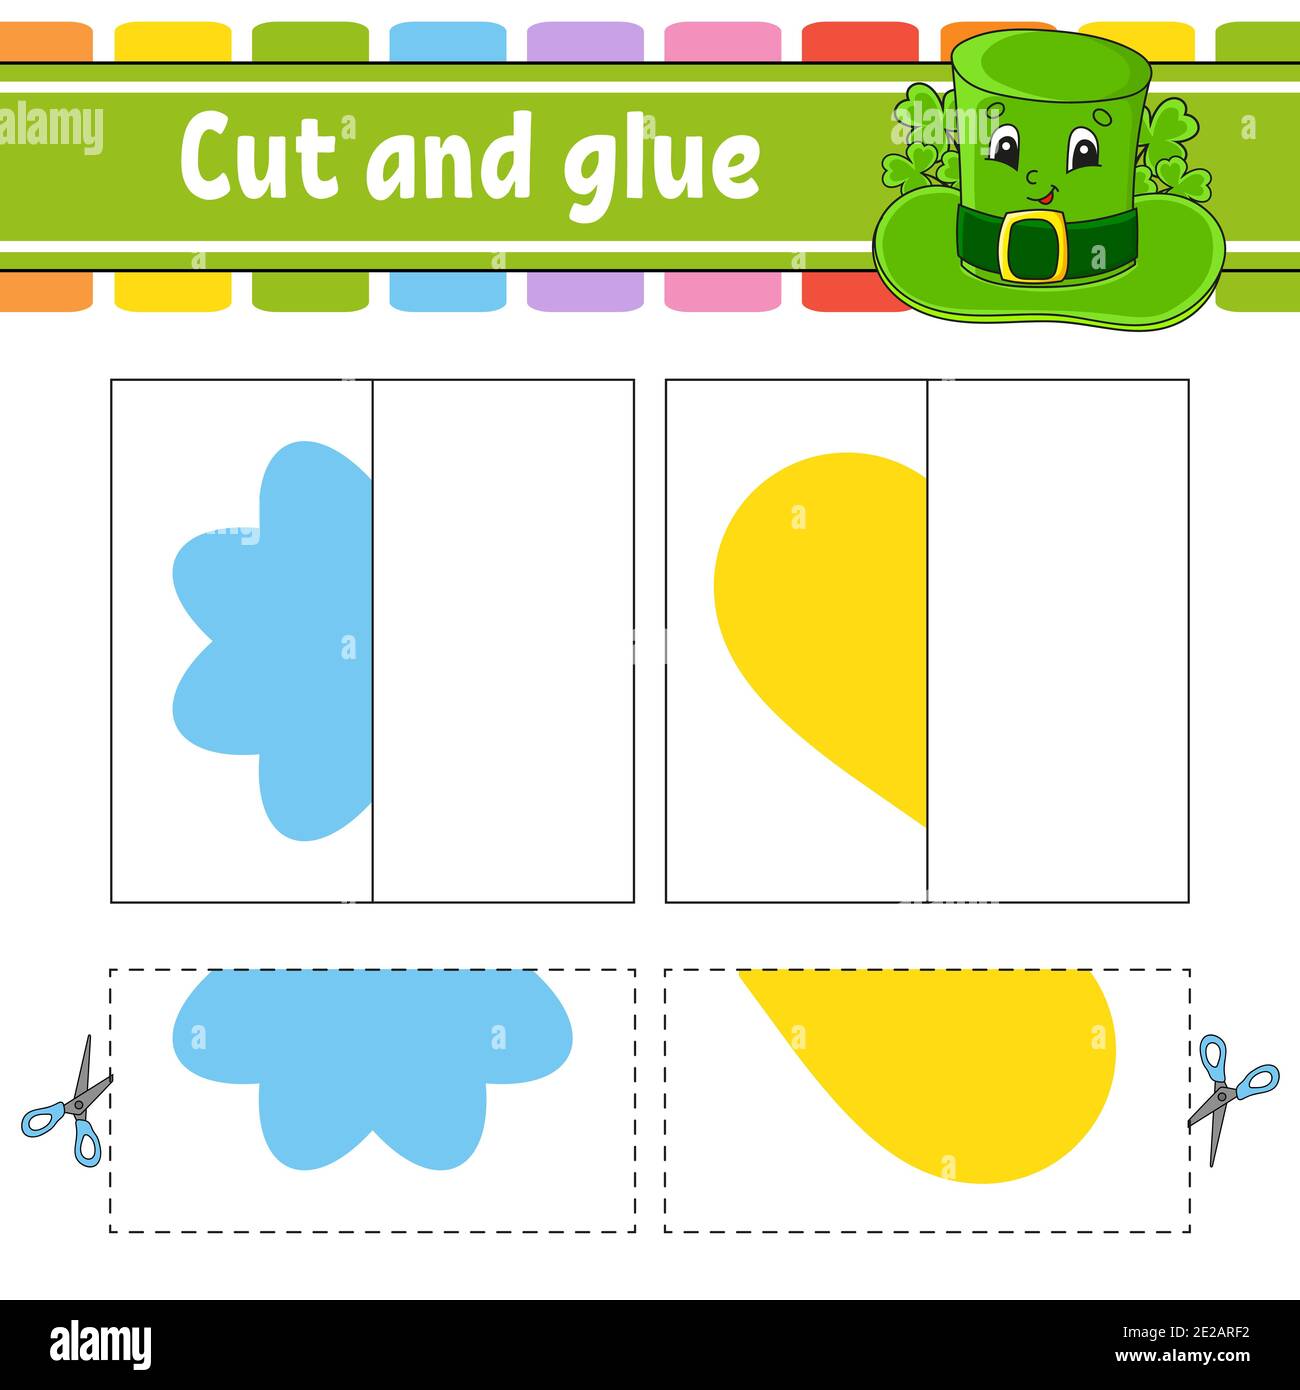 https://c8.alamy.com/comp/2E2ARF2/cut-and-play-paper-game-with-glue-flash-cards-flower-heart-hat-education-worksheet-activity-page-funny-character-isolated-vector-illustration-2E2ARF2.jpg